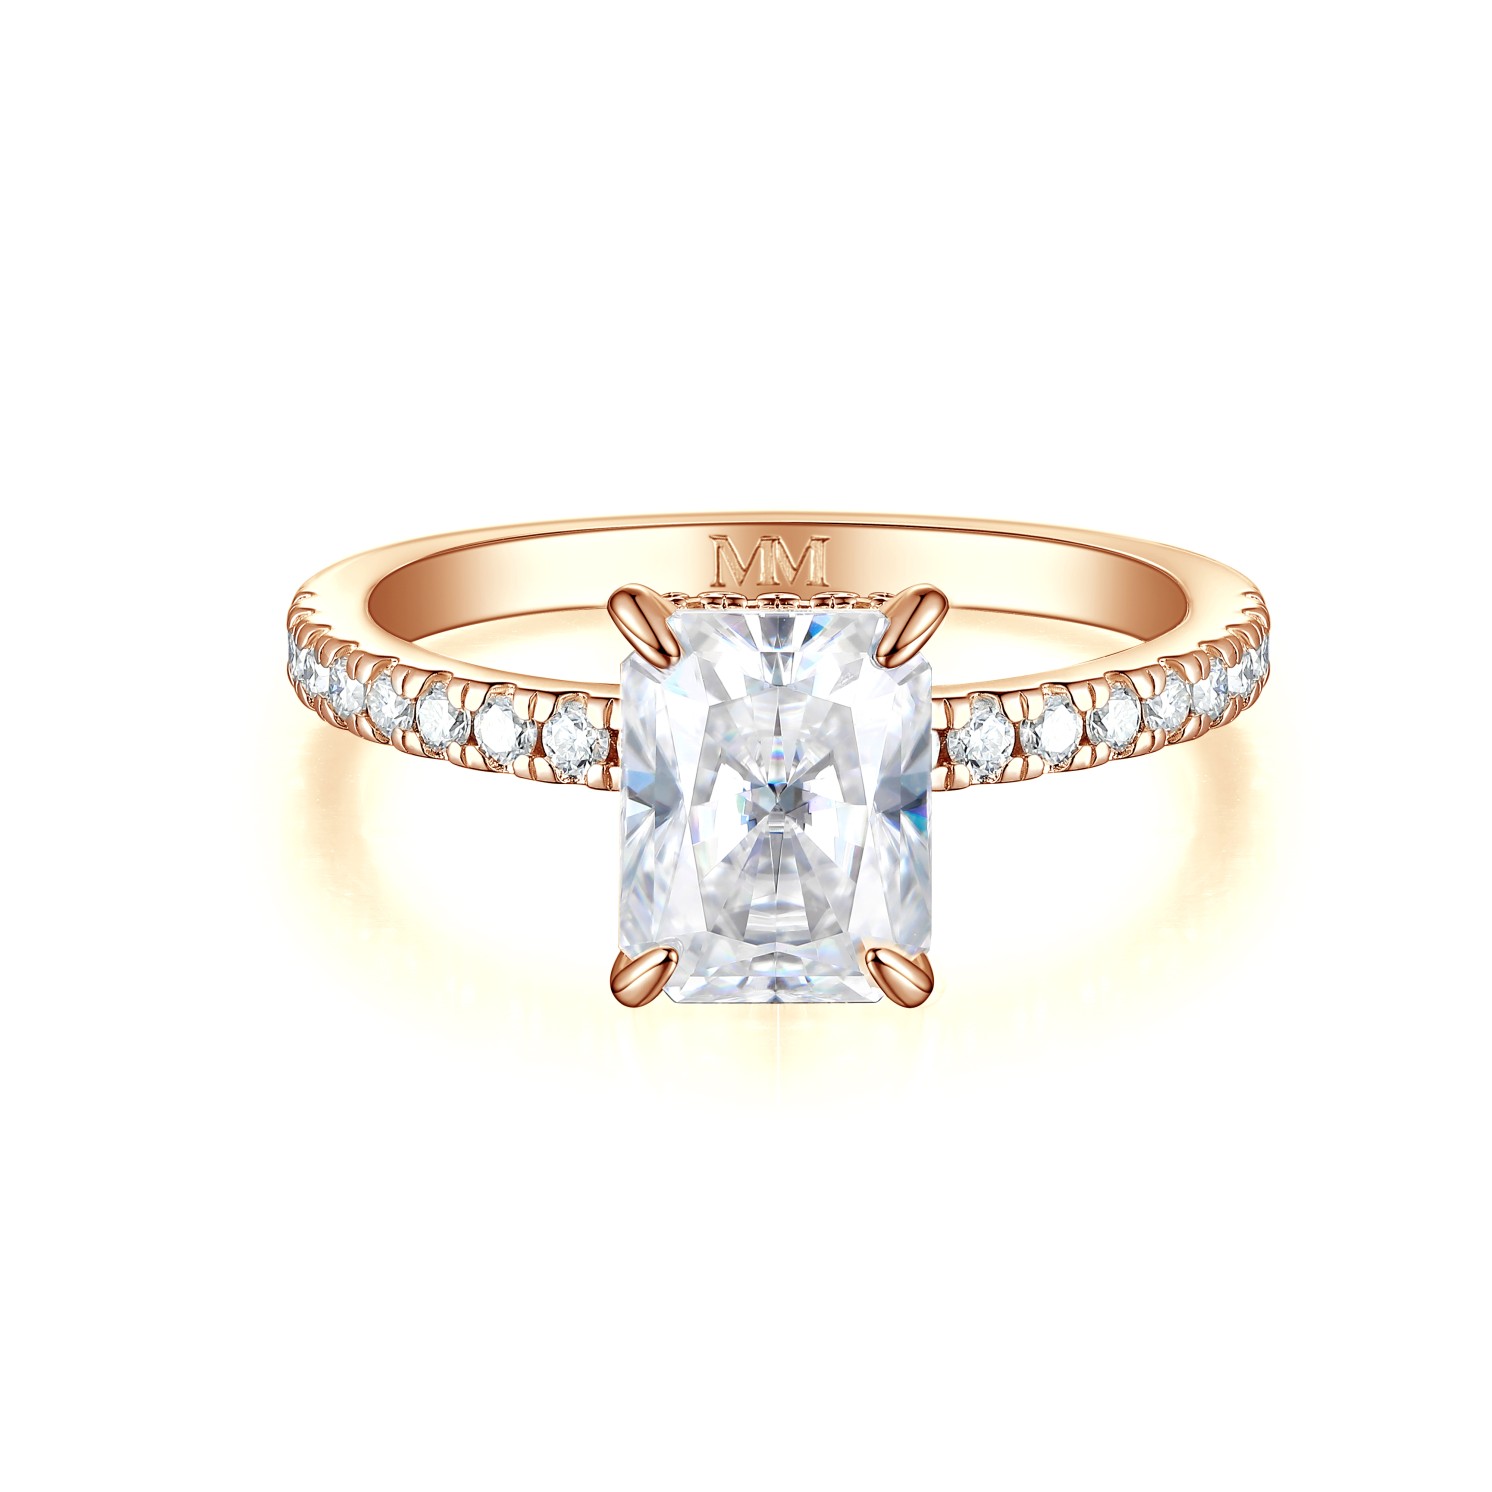 Astra - Moissanite Ring with Pavé Side Stones & Hidden Halo